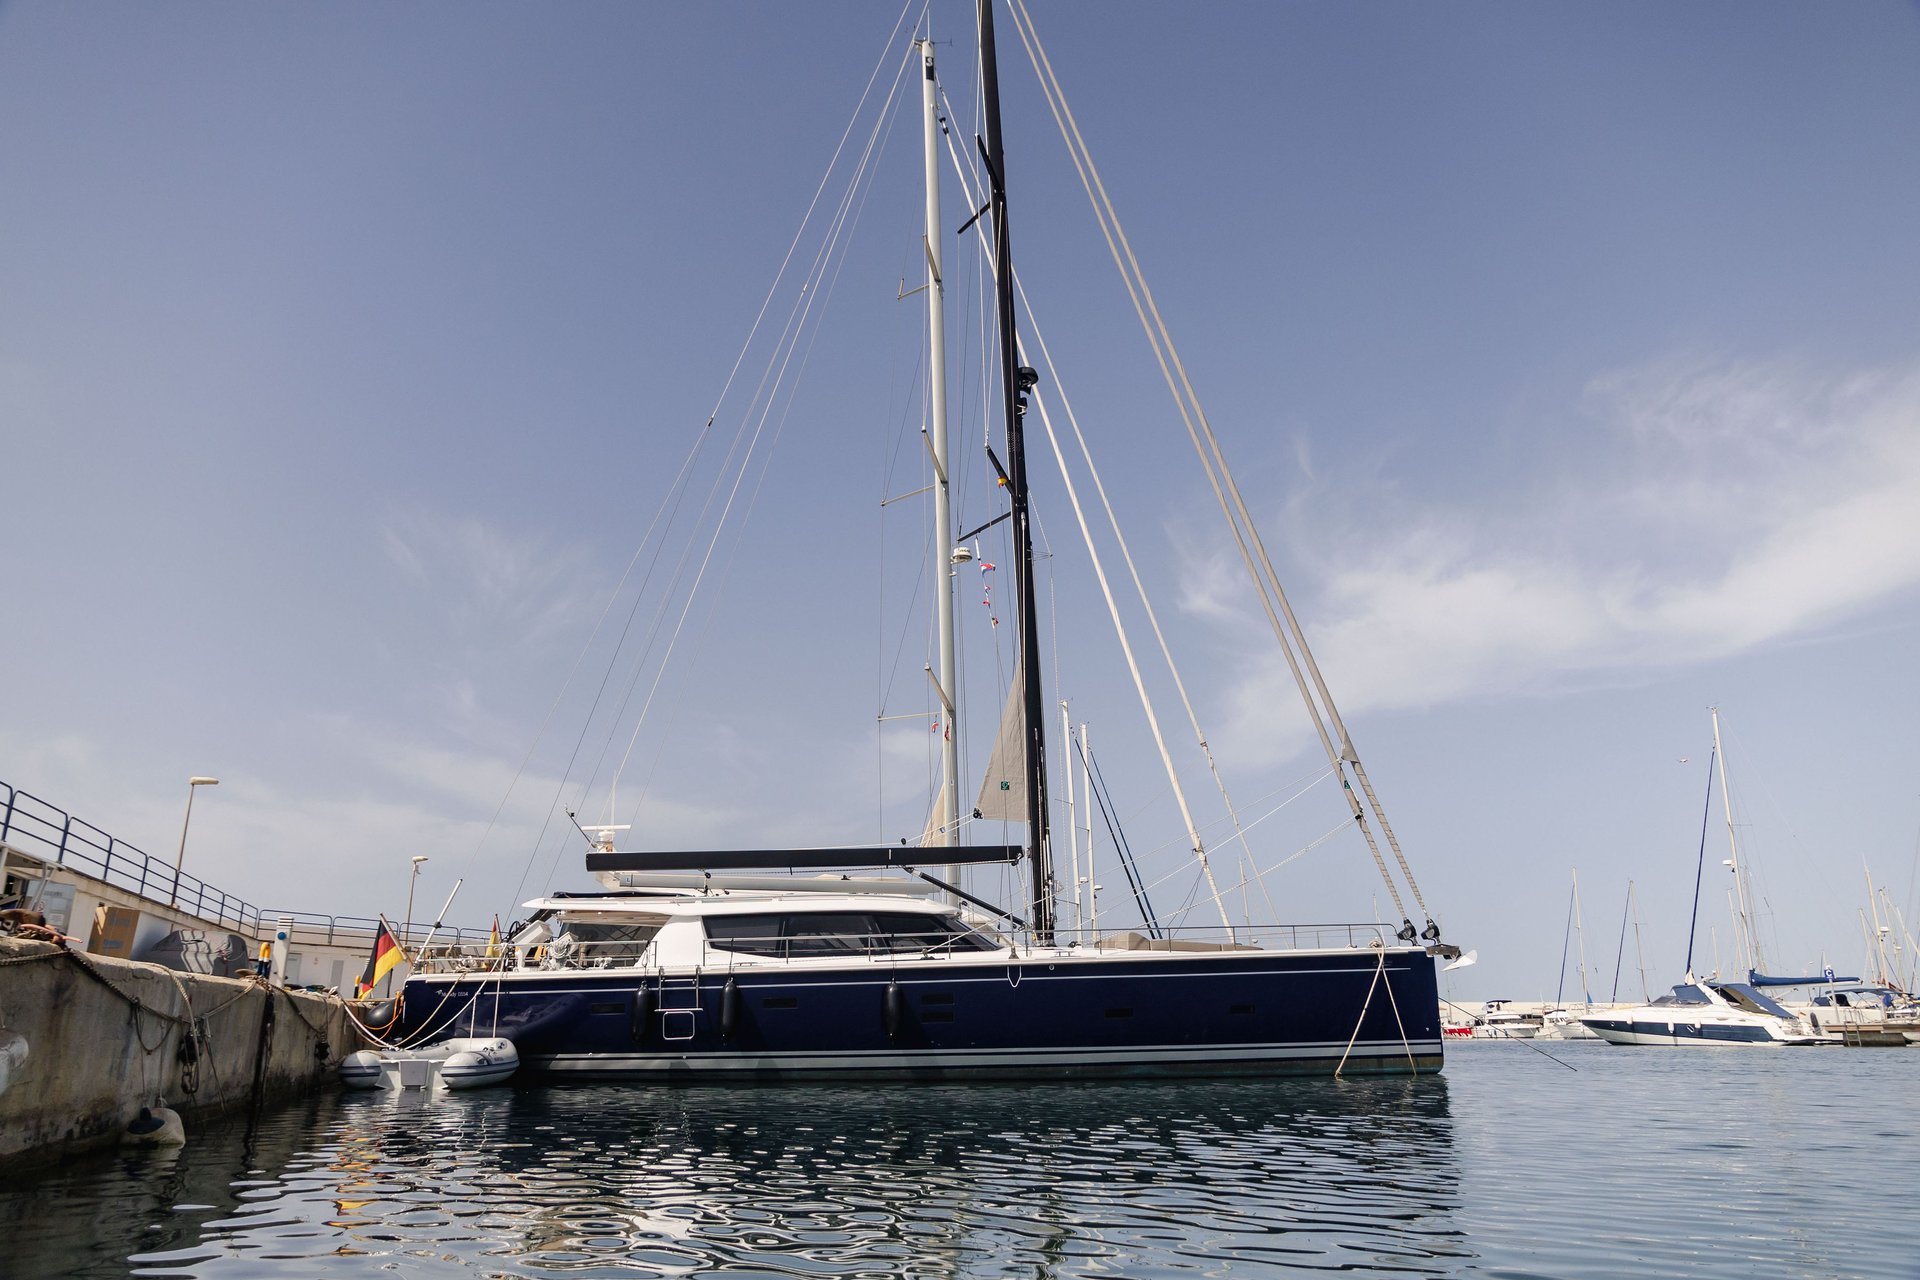 Sail boat FOR CHARTER, year 2022 brand Moody and model 54 DS, available in Can Pastilla Palma Mallorca España